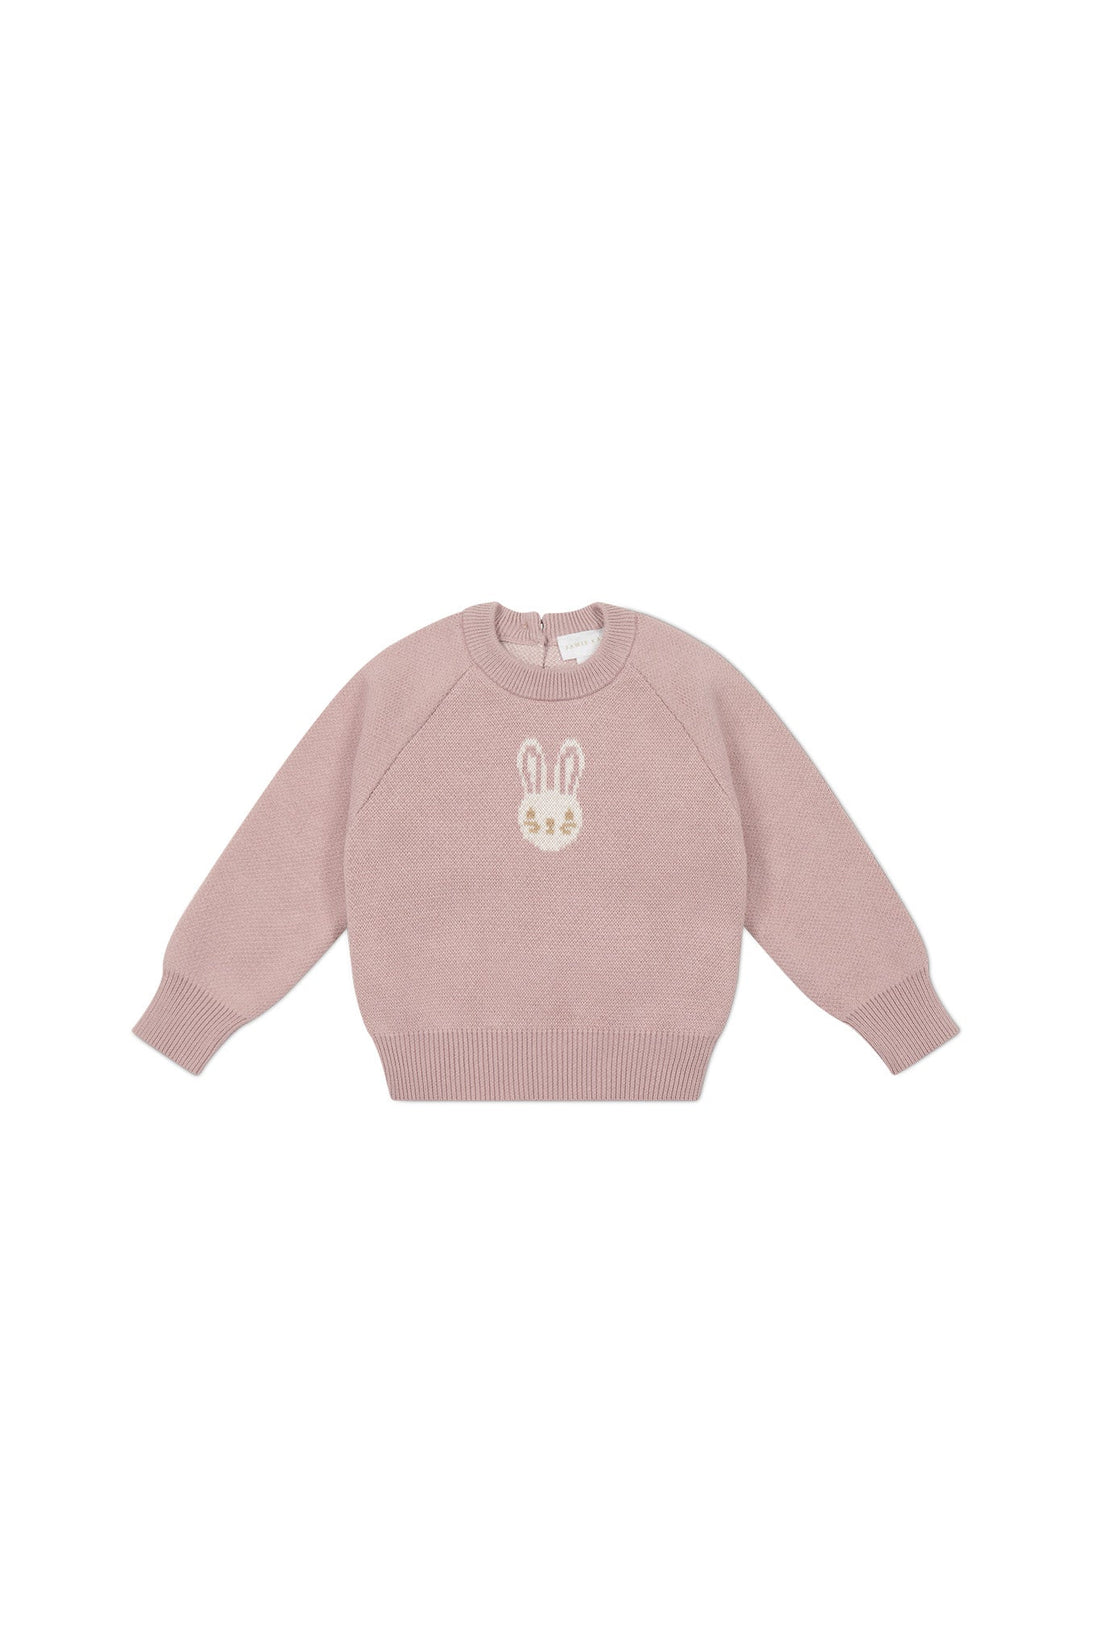 Ethan Jumper - Powder Pink Childrens Jumper from Jamie Kay USA